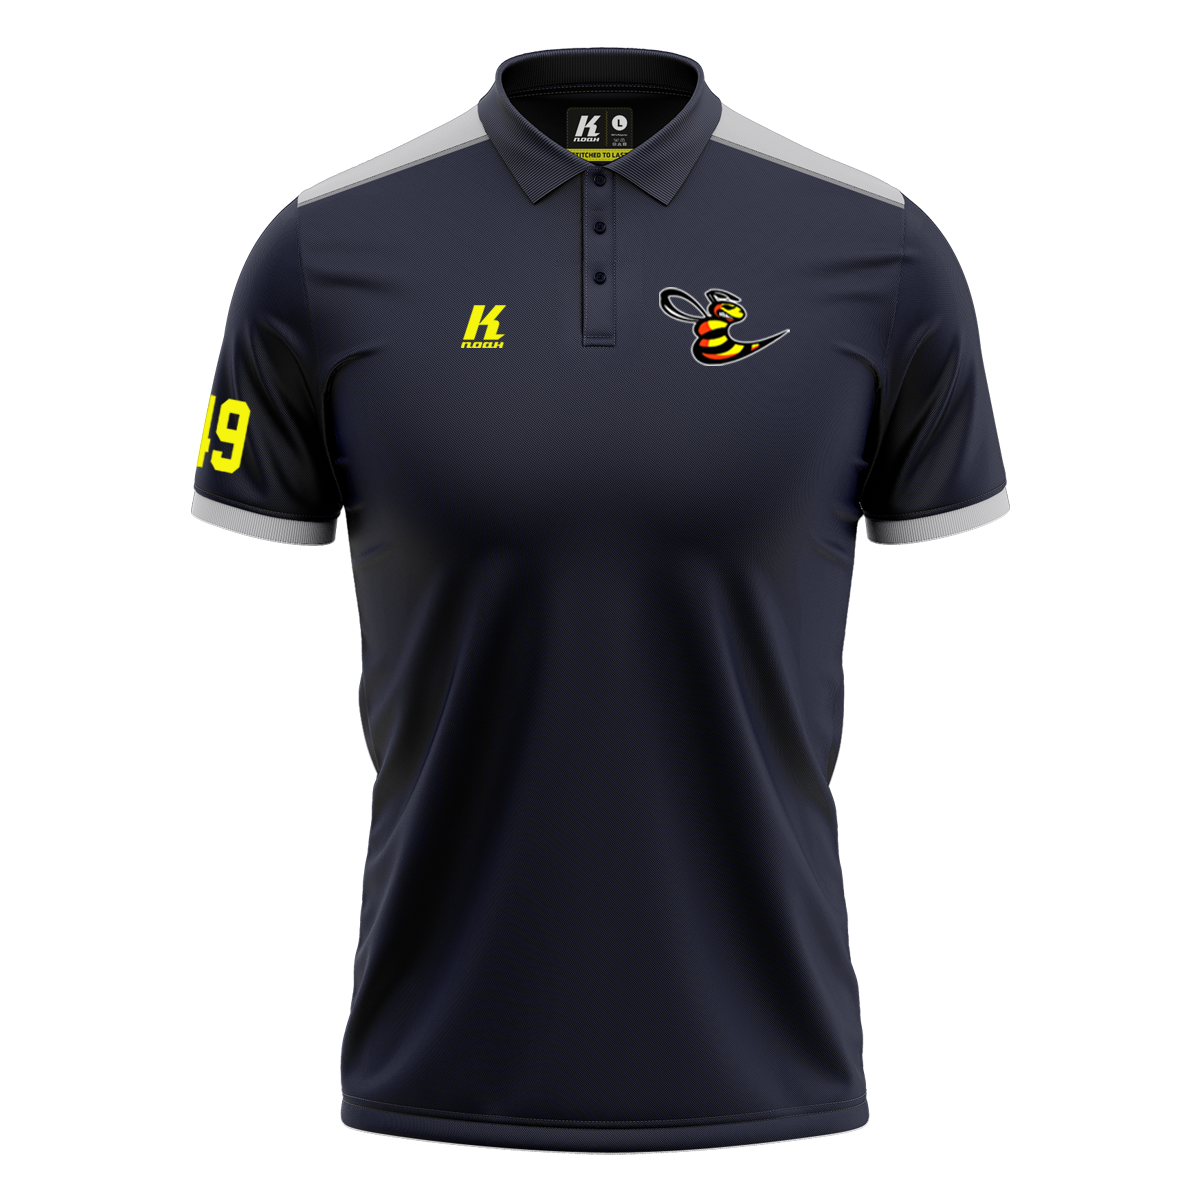 Hornets K.Tech-Fiber Polo “Heritage” with Playernumber/Initials